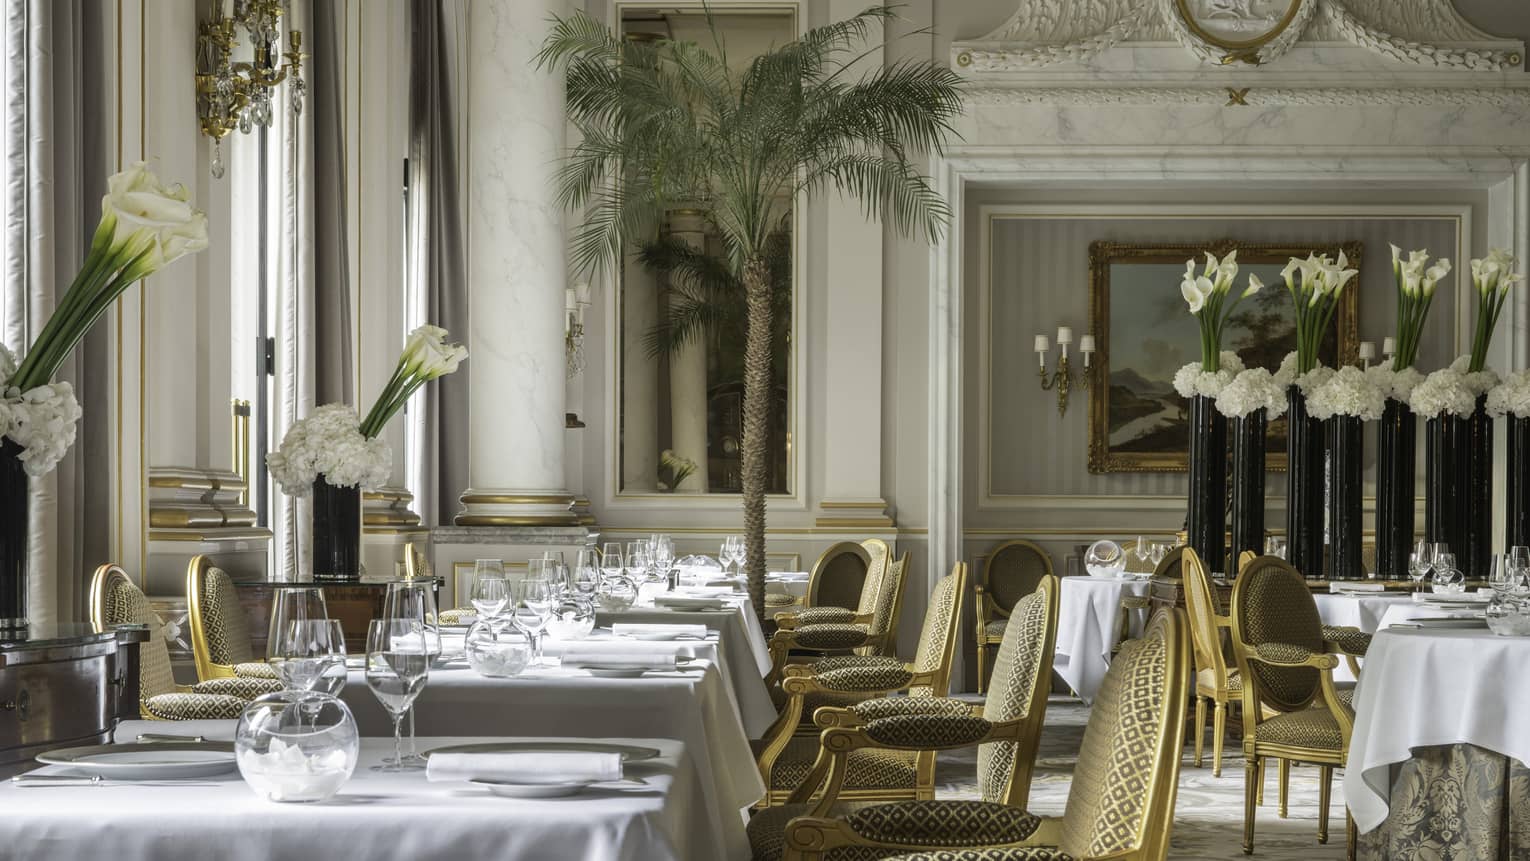 Interior view of elegant restaurant with gold upholstered chairs, white table clothes, white lilies, marble columns and molding